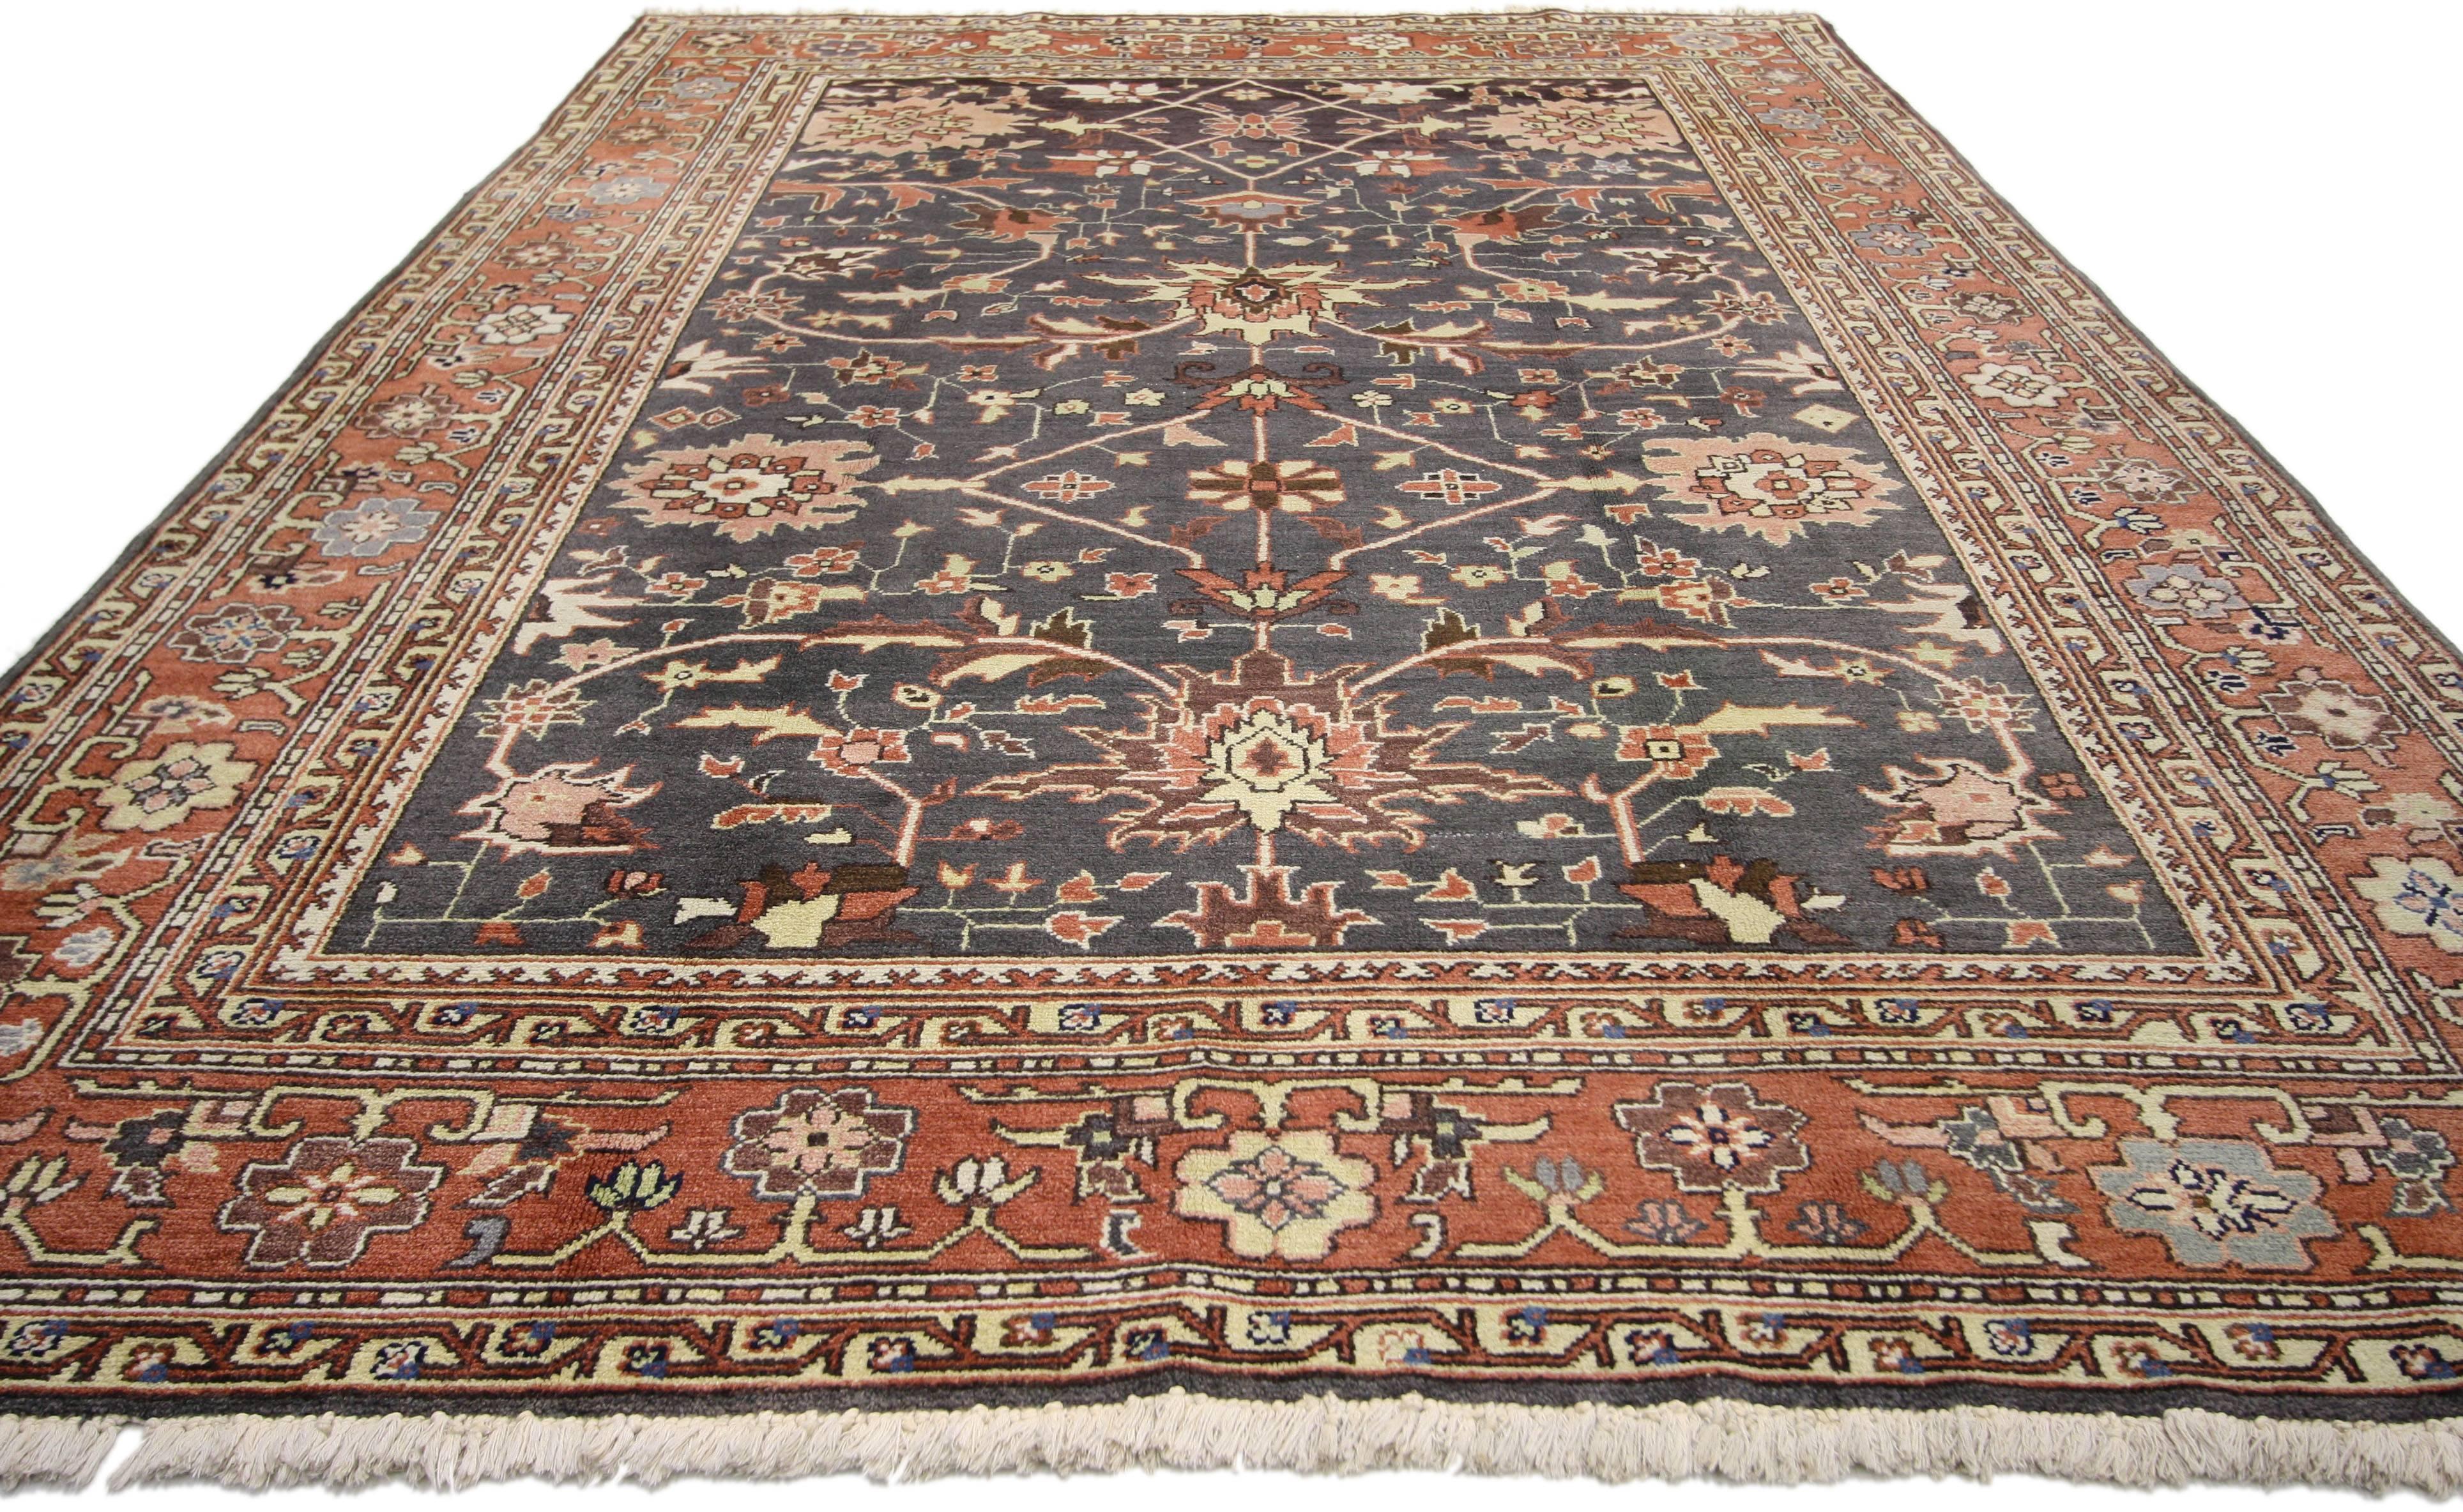 74642, vintage Persian style rug with tradition modern design. This hand-knotted wool vintage Persian style rug features a large-scale traditional Herati design. The large-scale rectilinear motifs contrast beautifully on the dark colored field. The